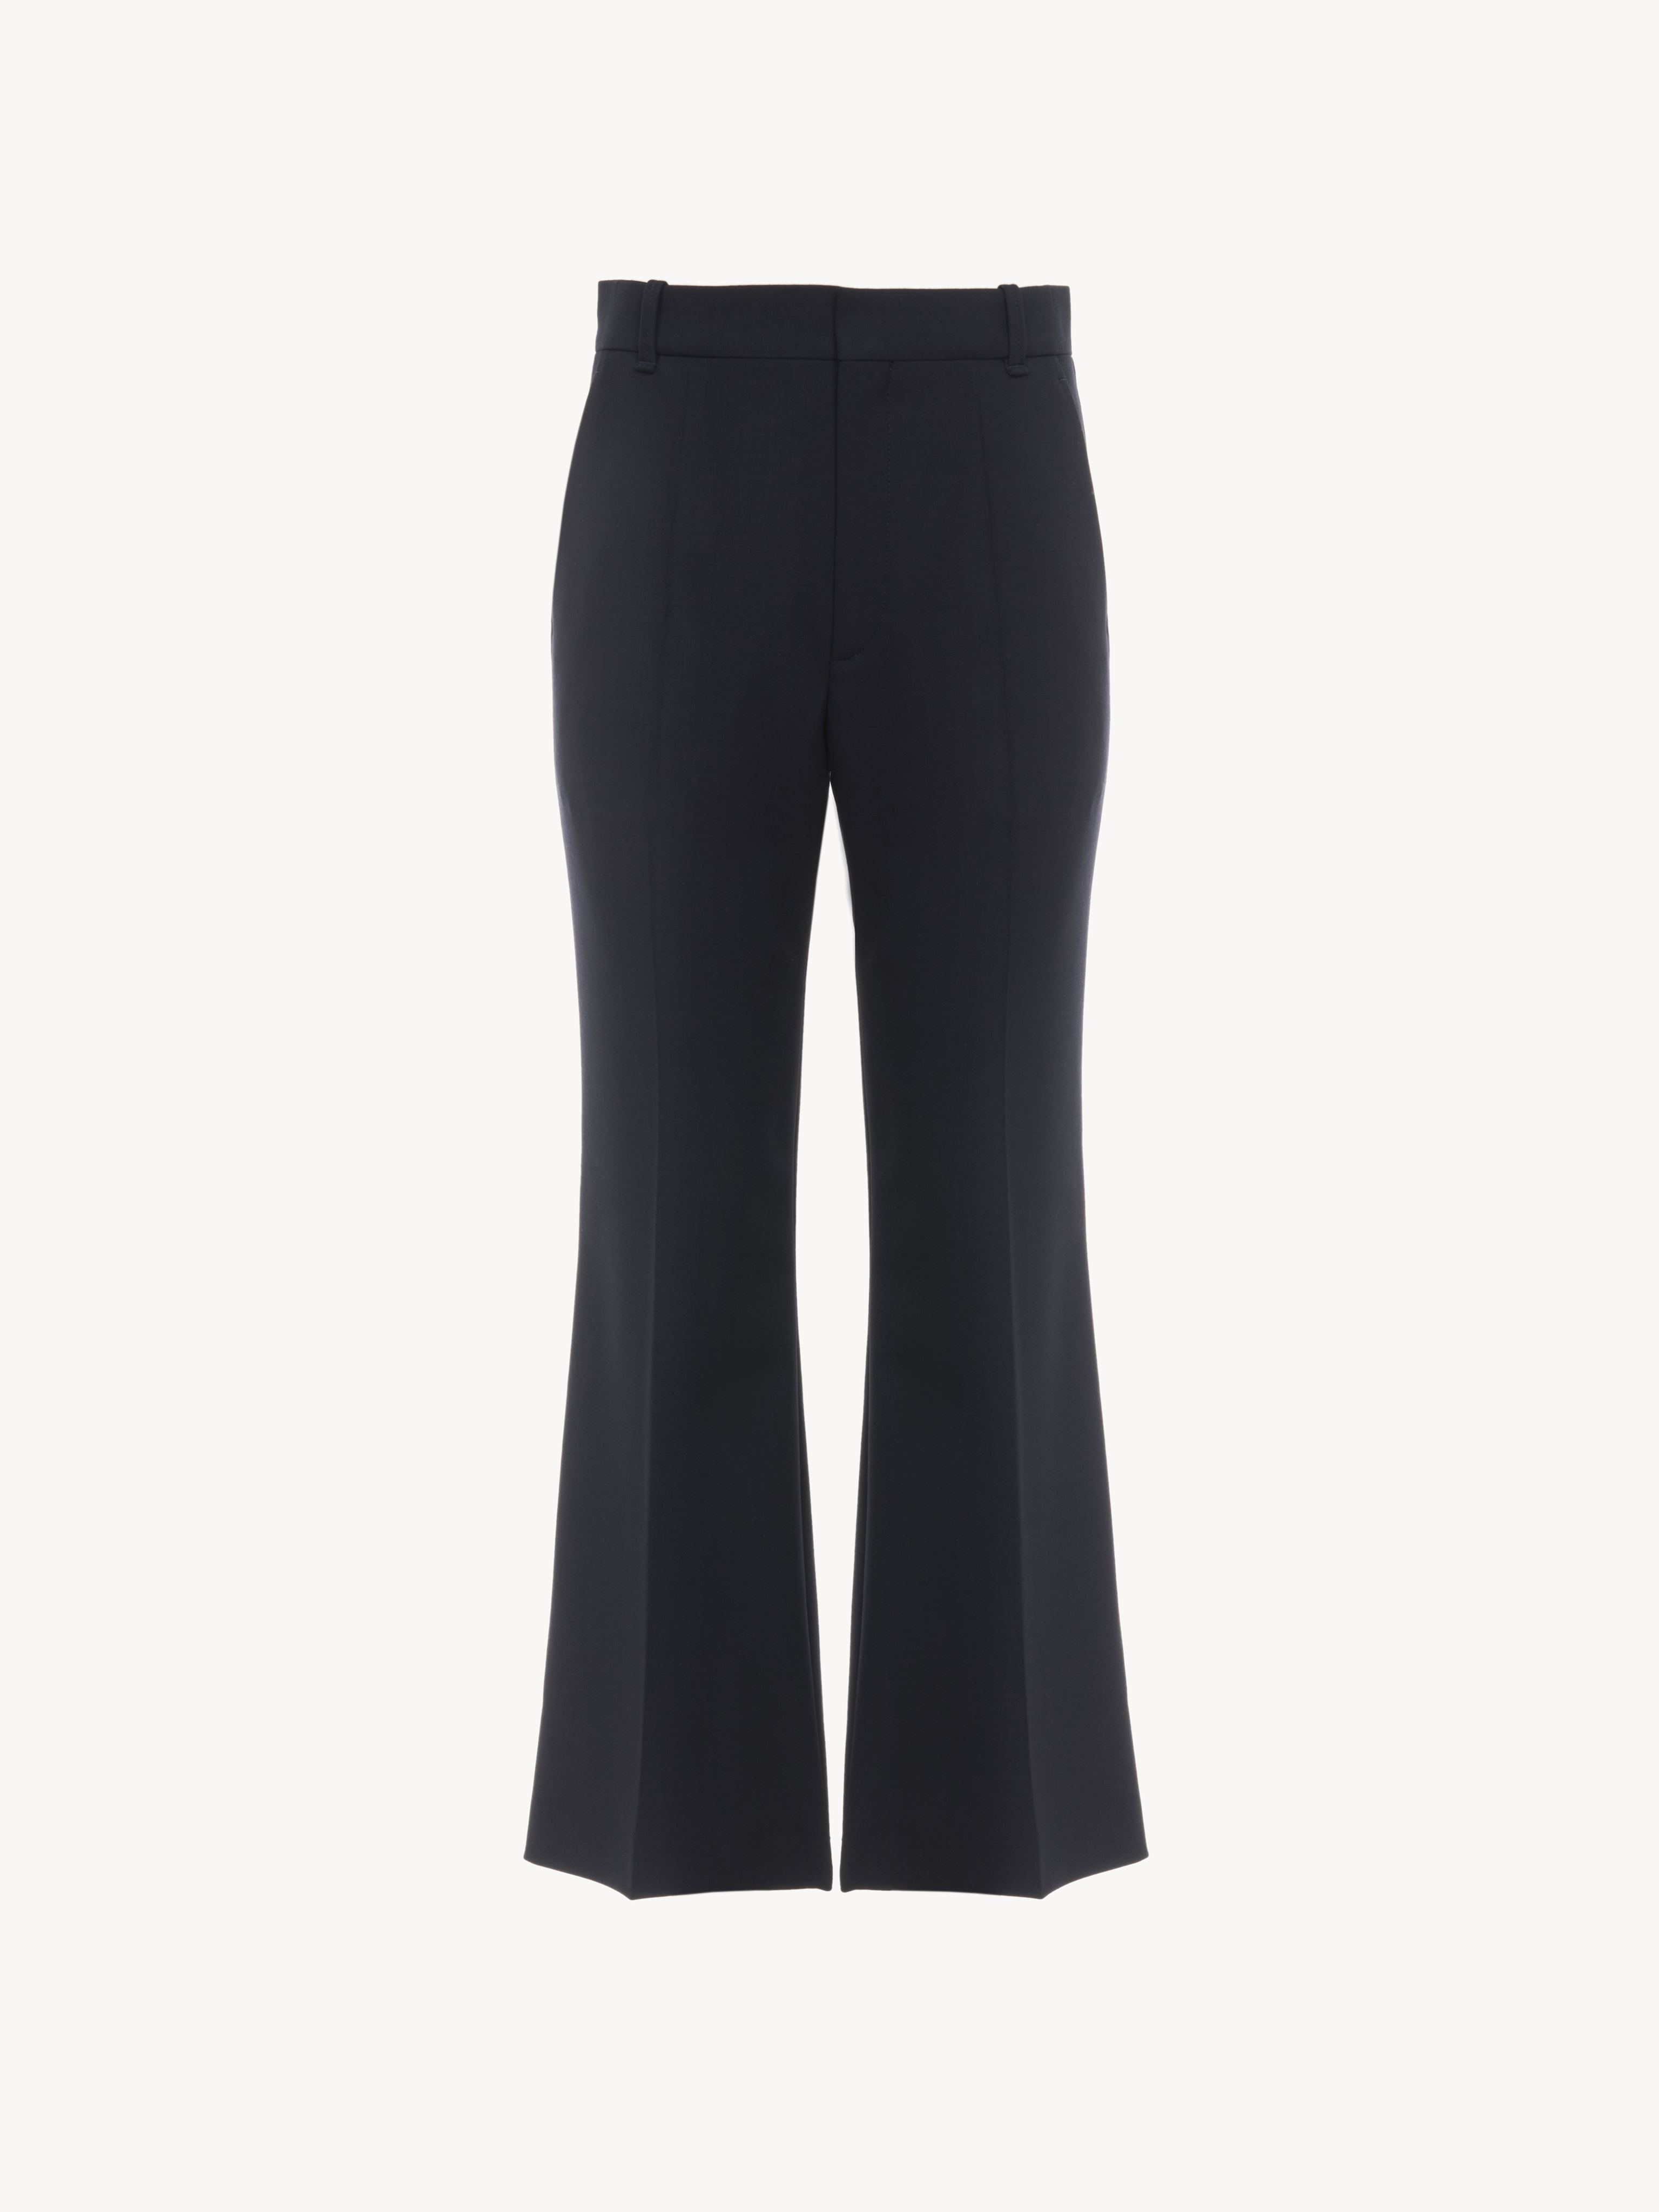 CHLOÉ CROPPED BOOTCUT TROUSERS BLUE SIZE 10 95% WOOL, 5% ELASTANE